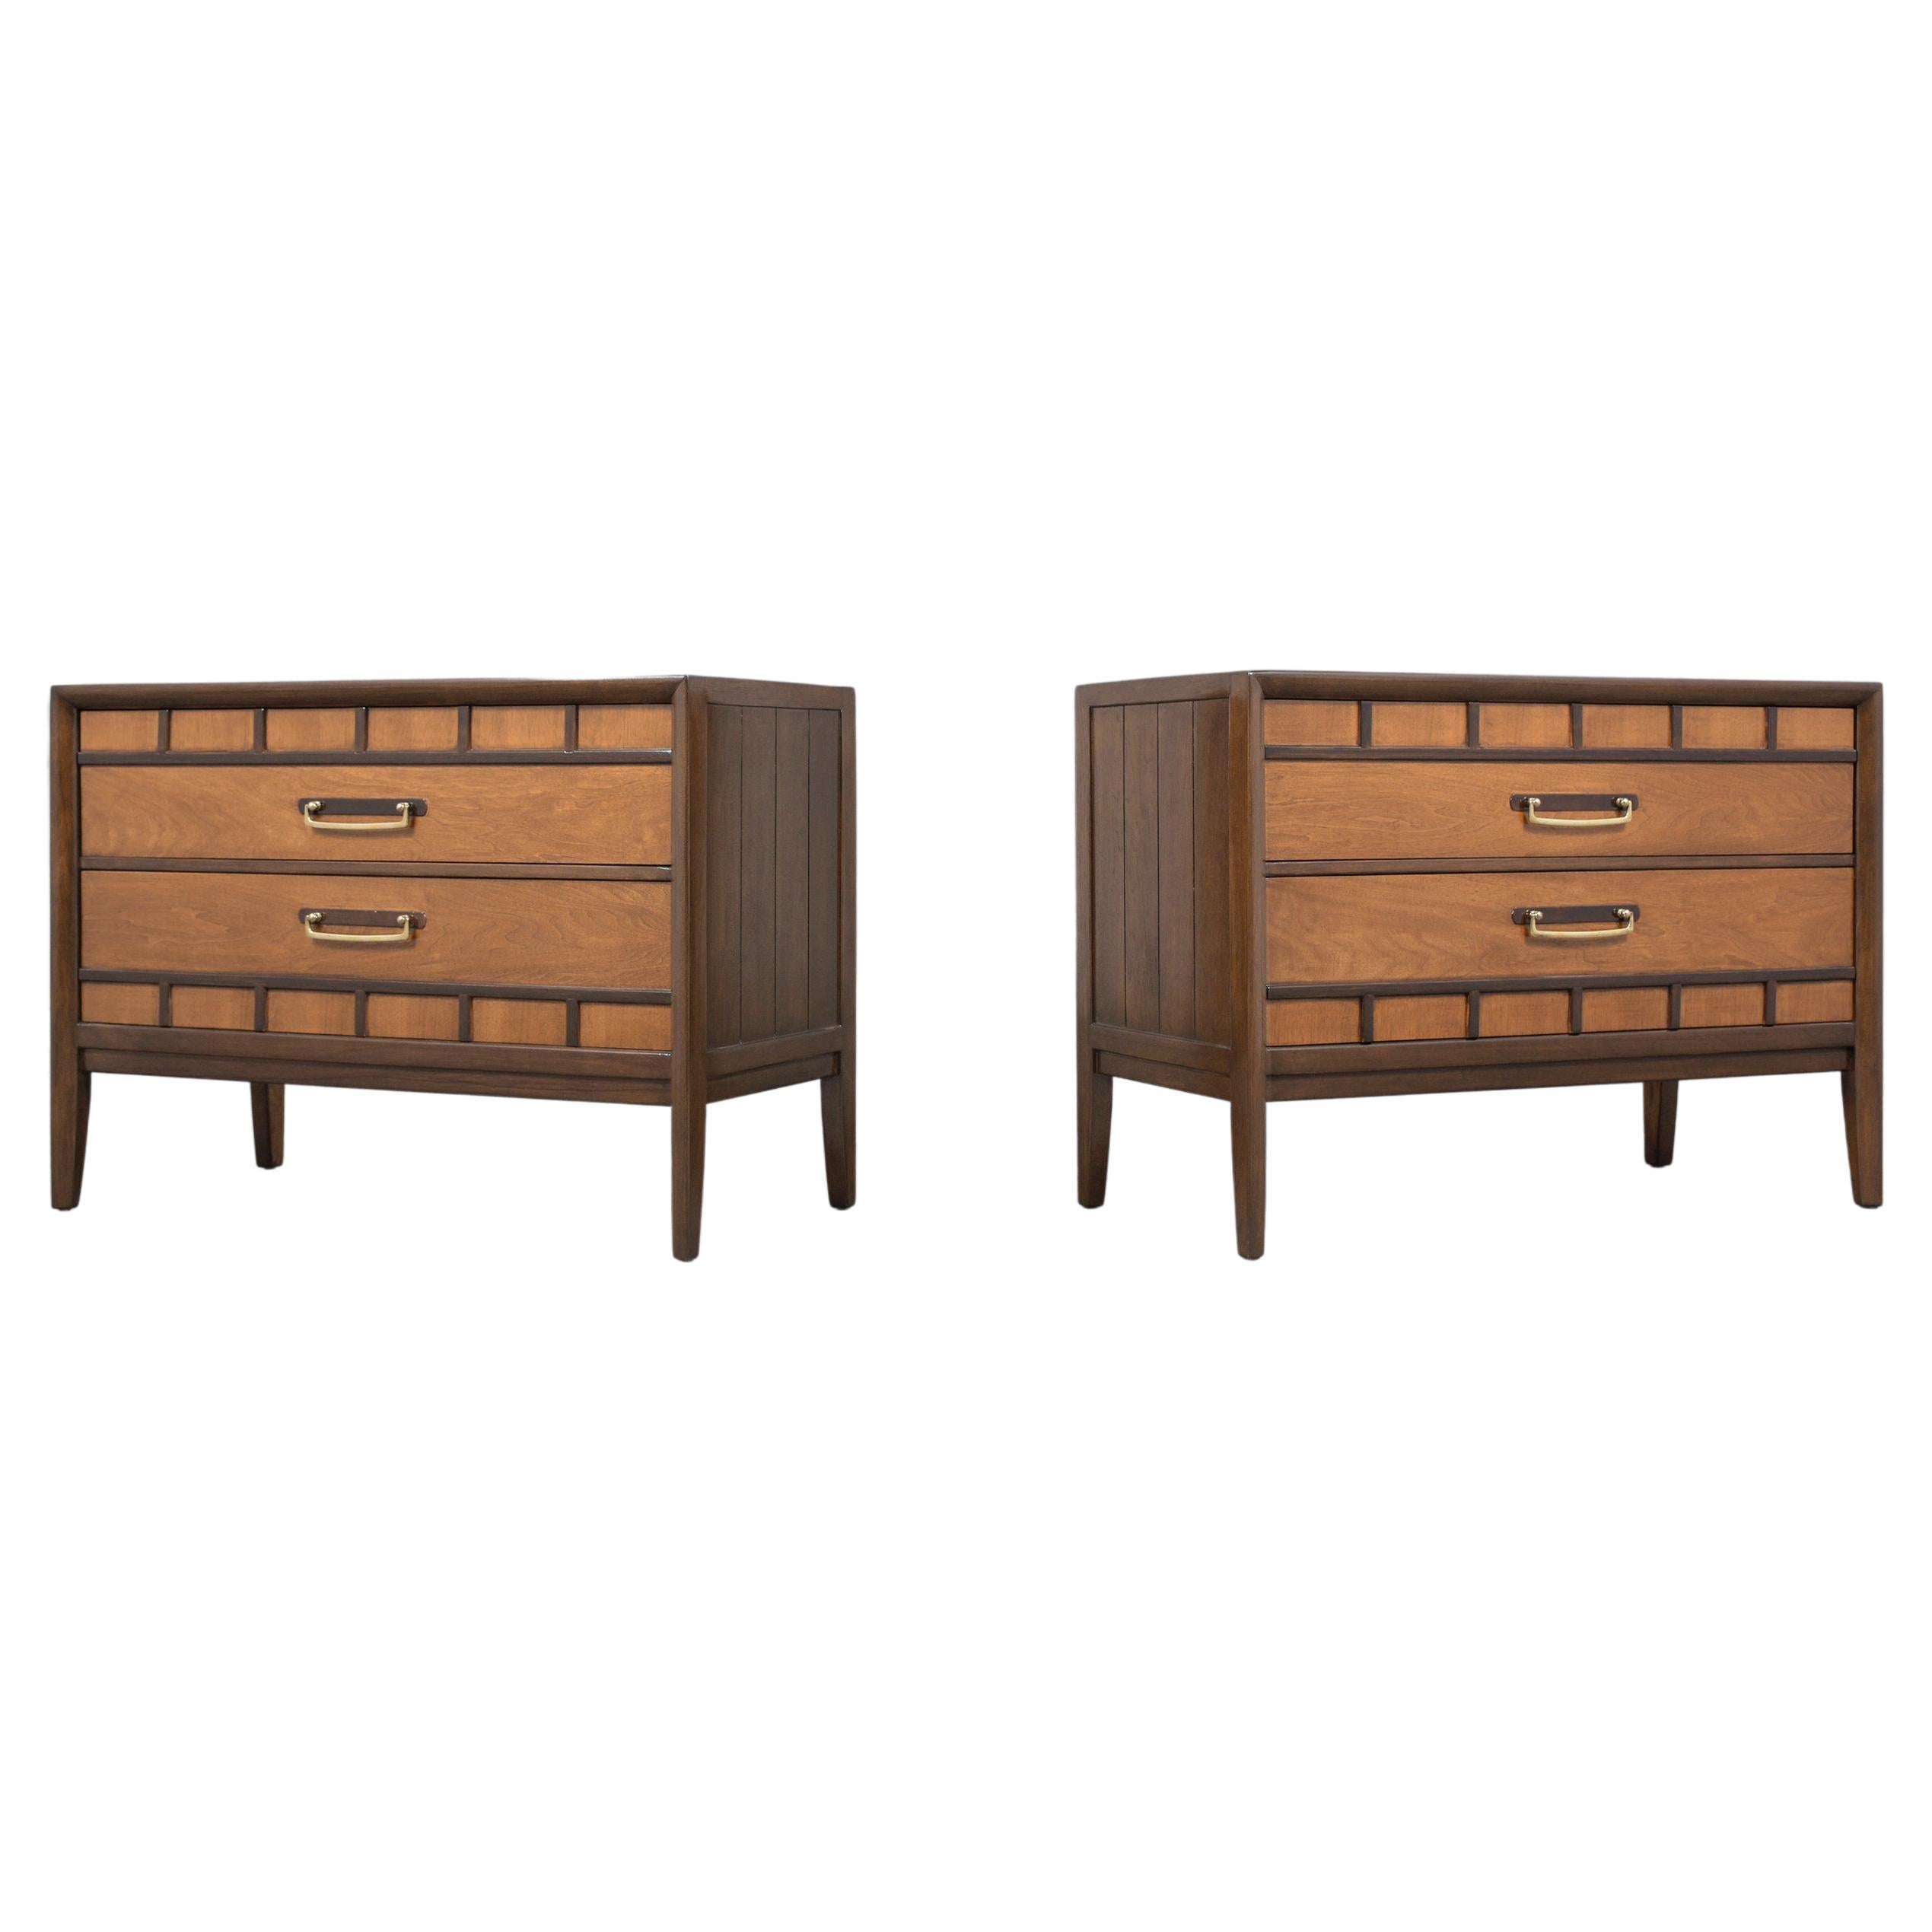 Pair of Vintage Mid-Century Chest of Drawers